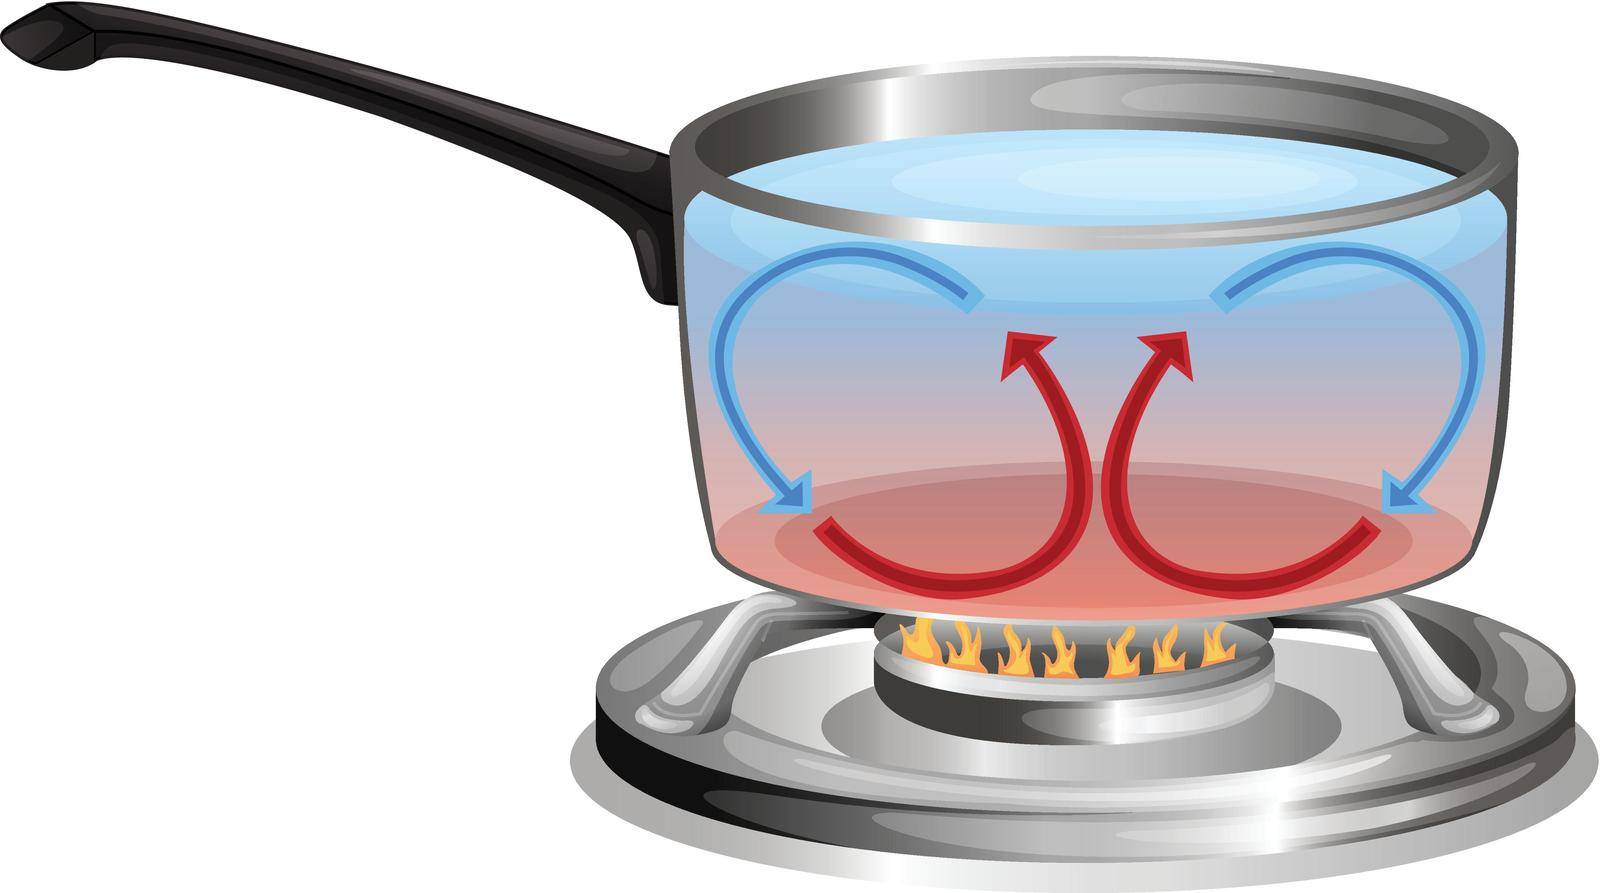 Illustration of a cooking pot on a white background